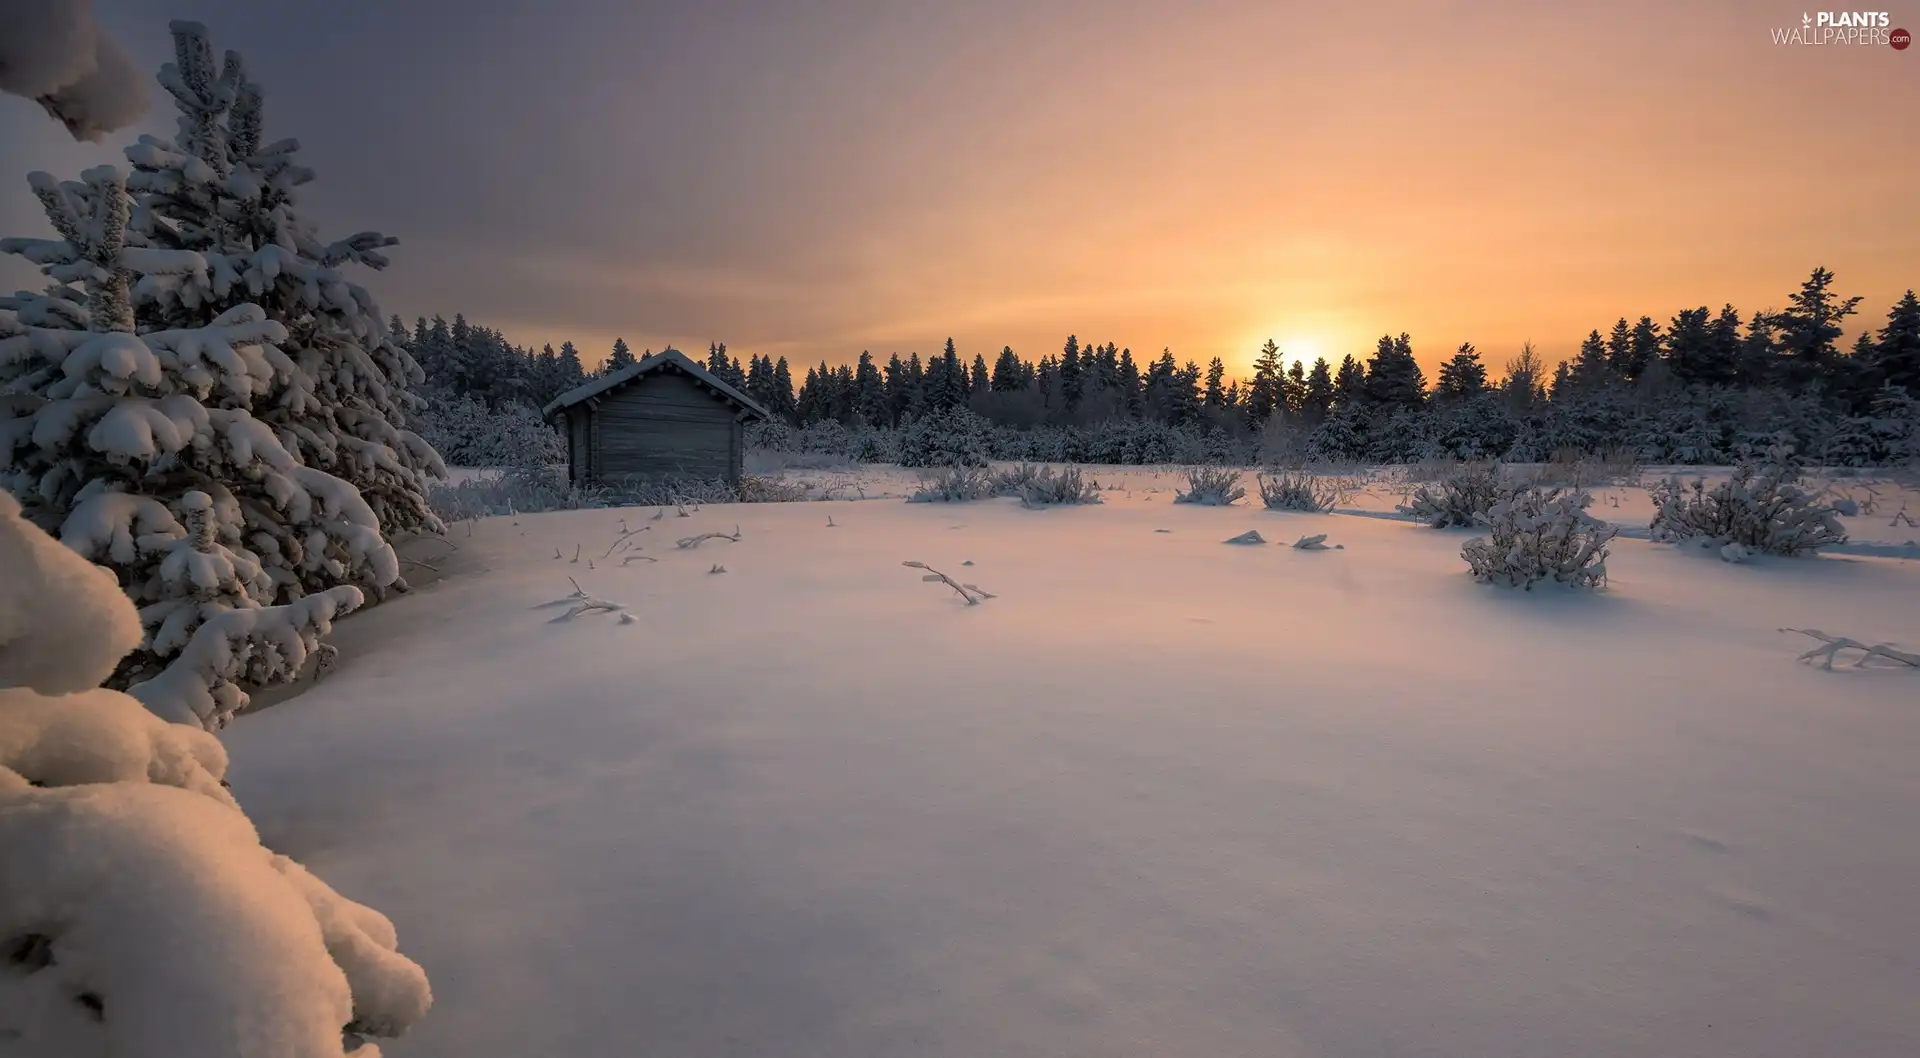 viewes, Snowy, cote, trees, winter, Spruces, Sunrise